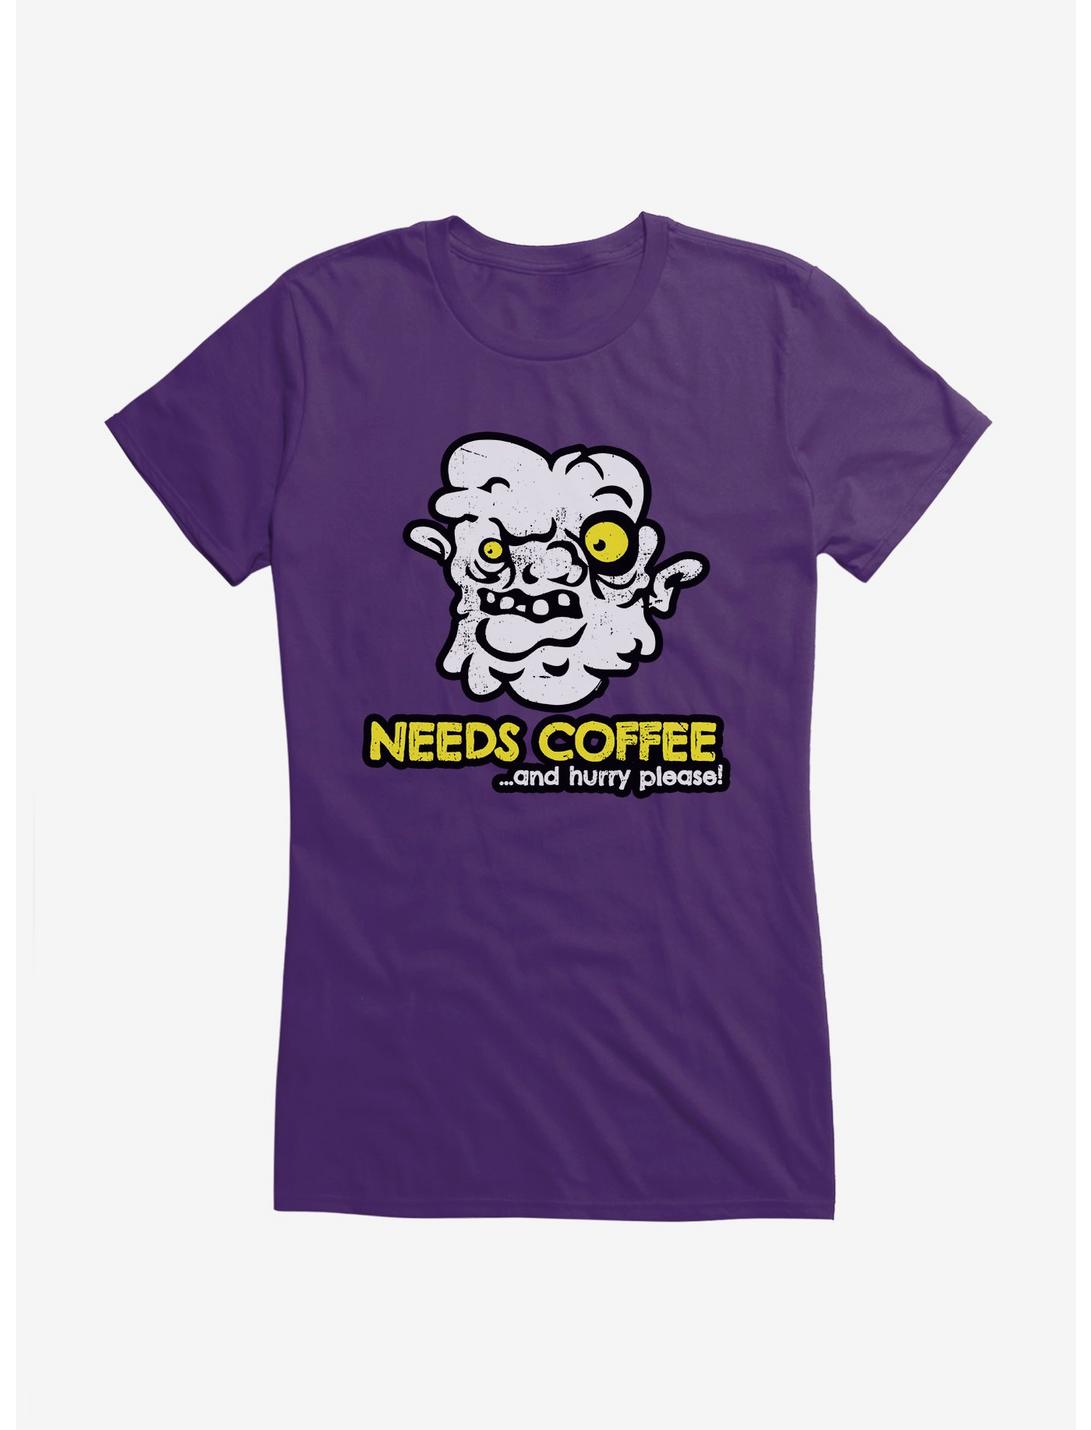 iCreate Needs Coffee And Hurry Please Girls T-Shirt, , hi-res